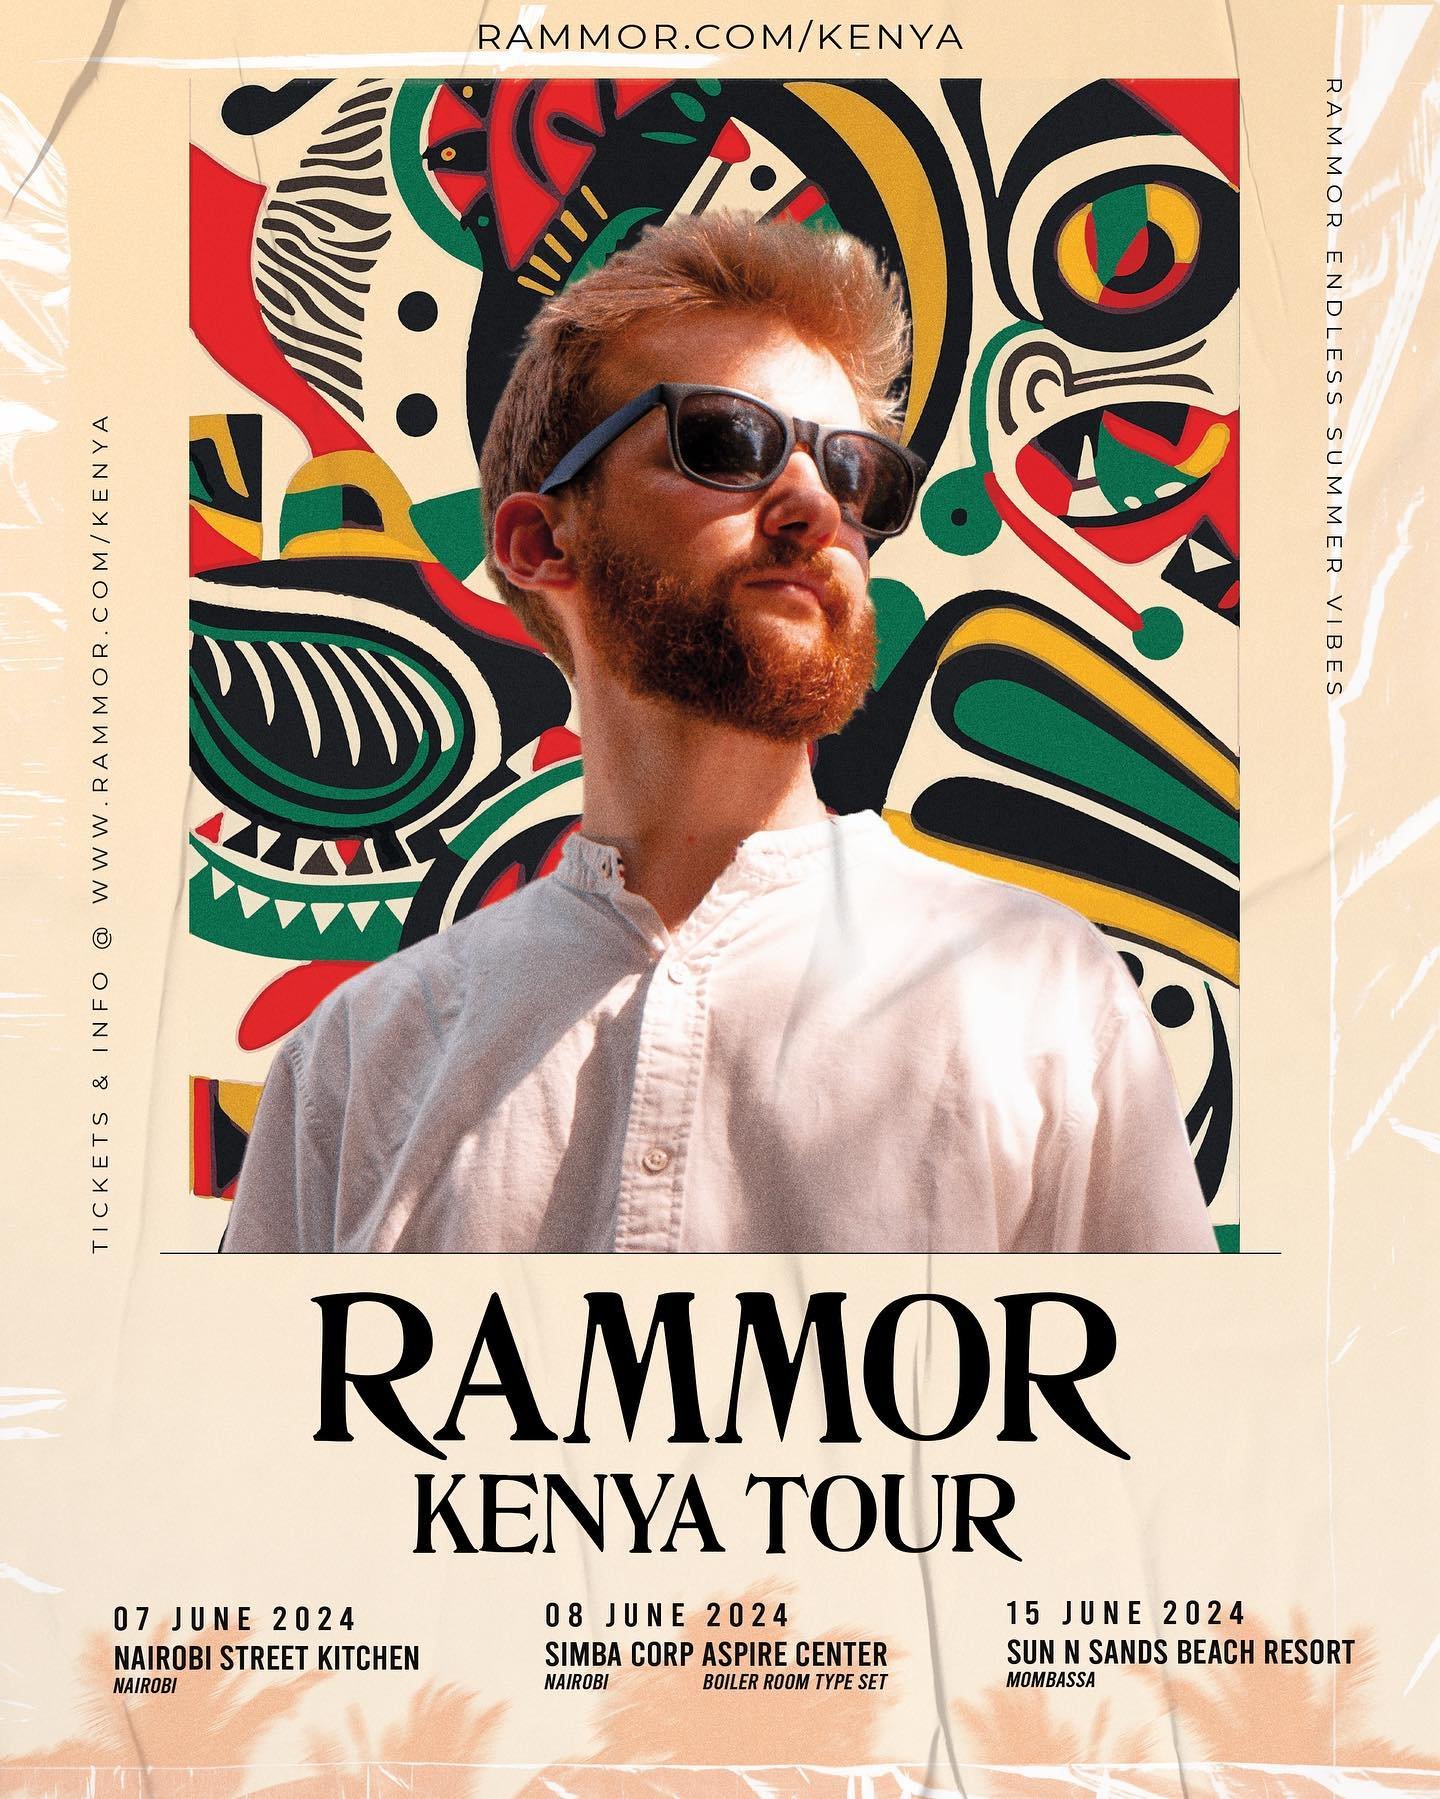 KENYA!!!! I am so happy that I can finally announce that I&lsquo;m coming again to you in June for my first ever Kenya Tour 🇰🇪❤️

Me and my team have been working for months making these shows possible! We had a lot of issues with venues / promoter